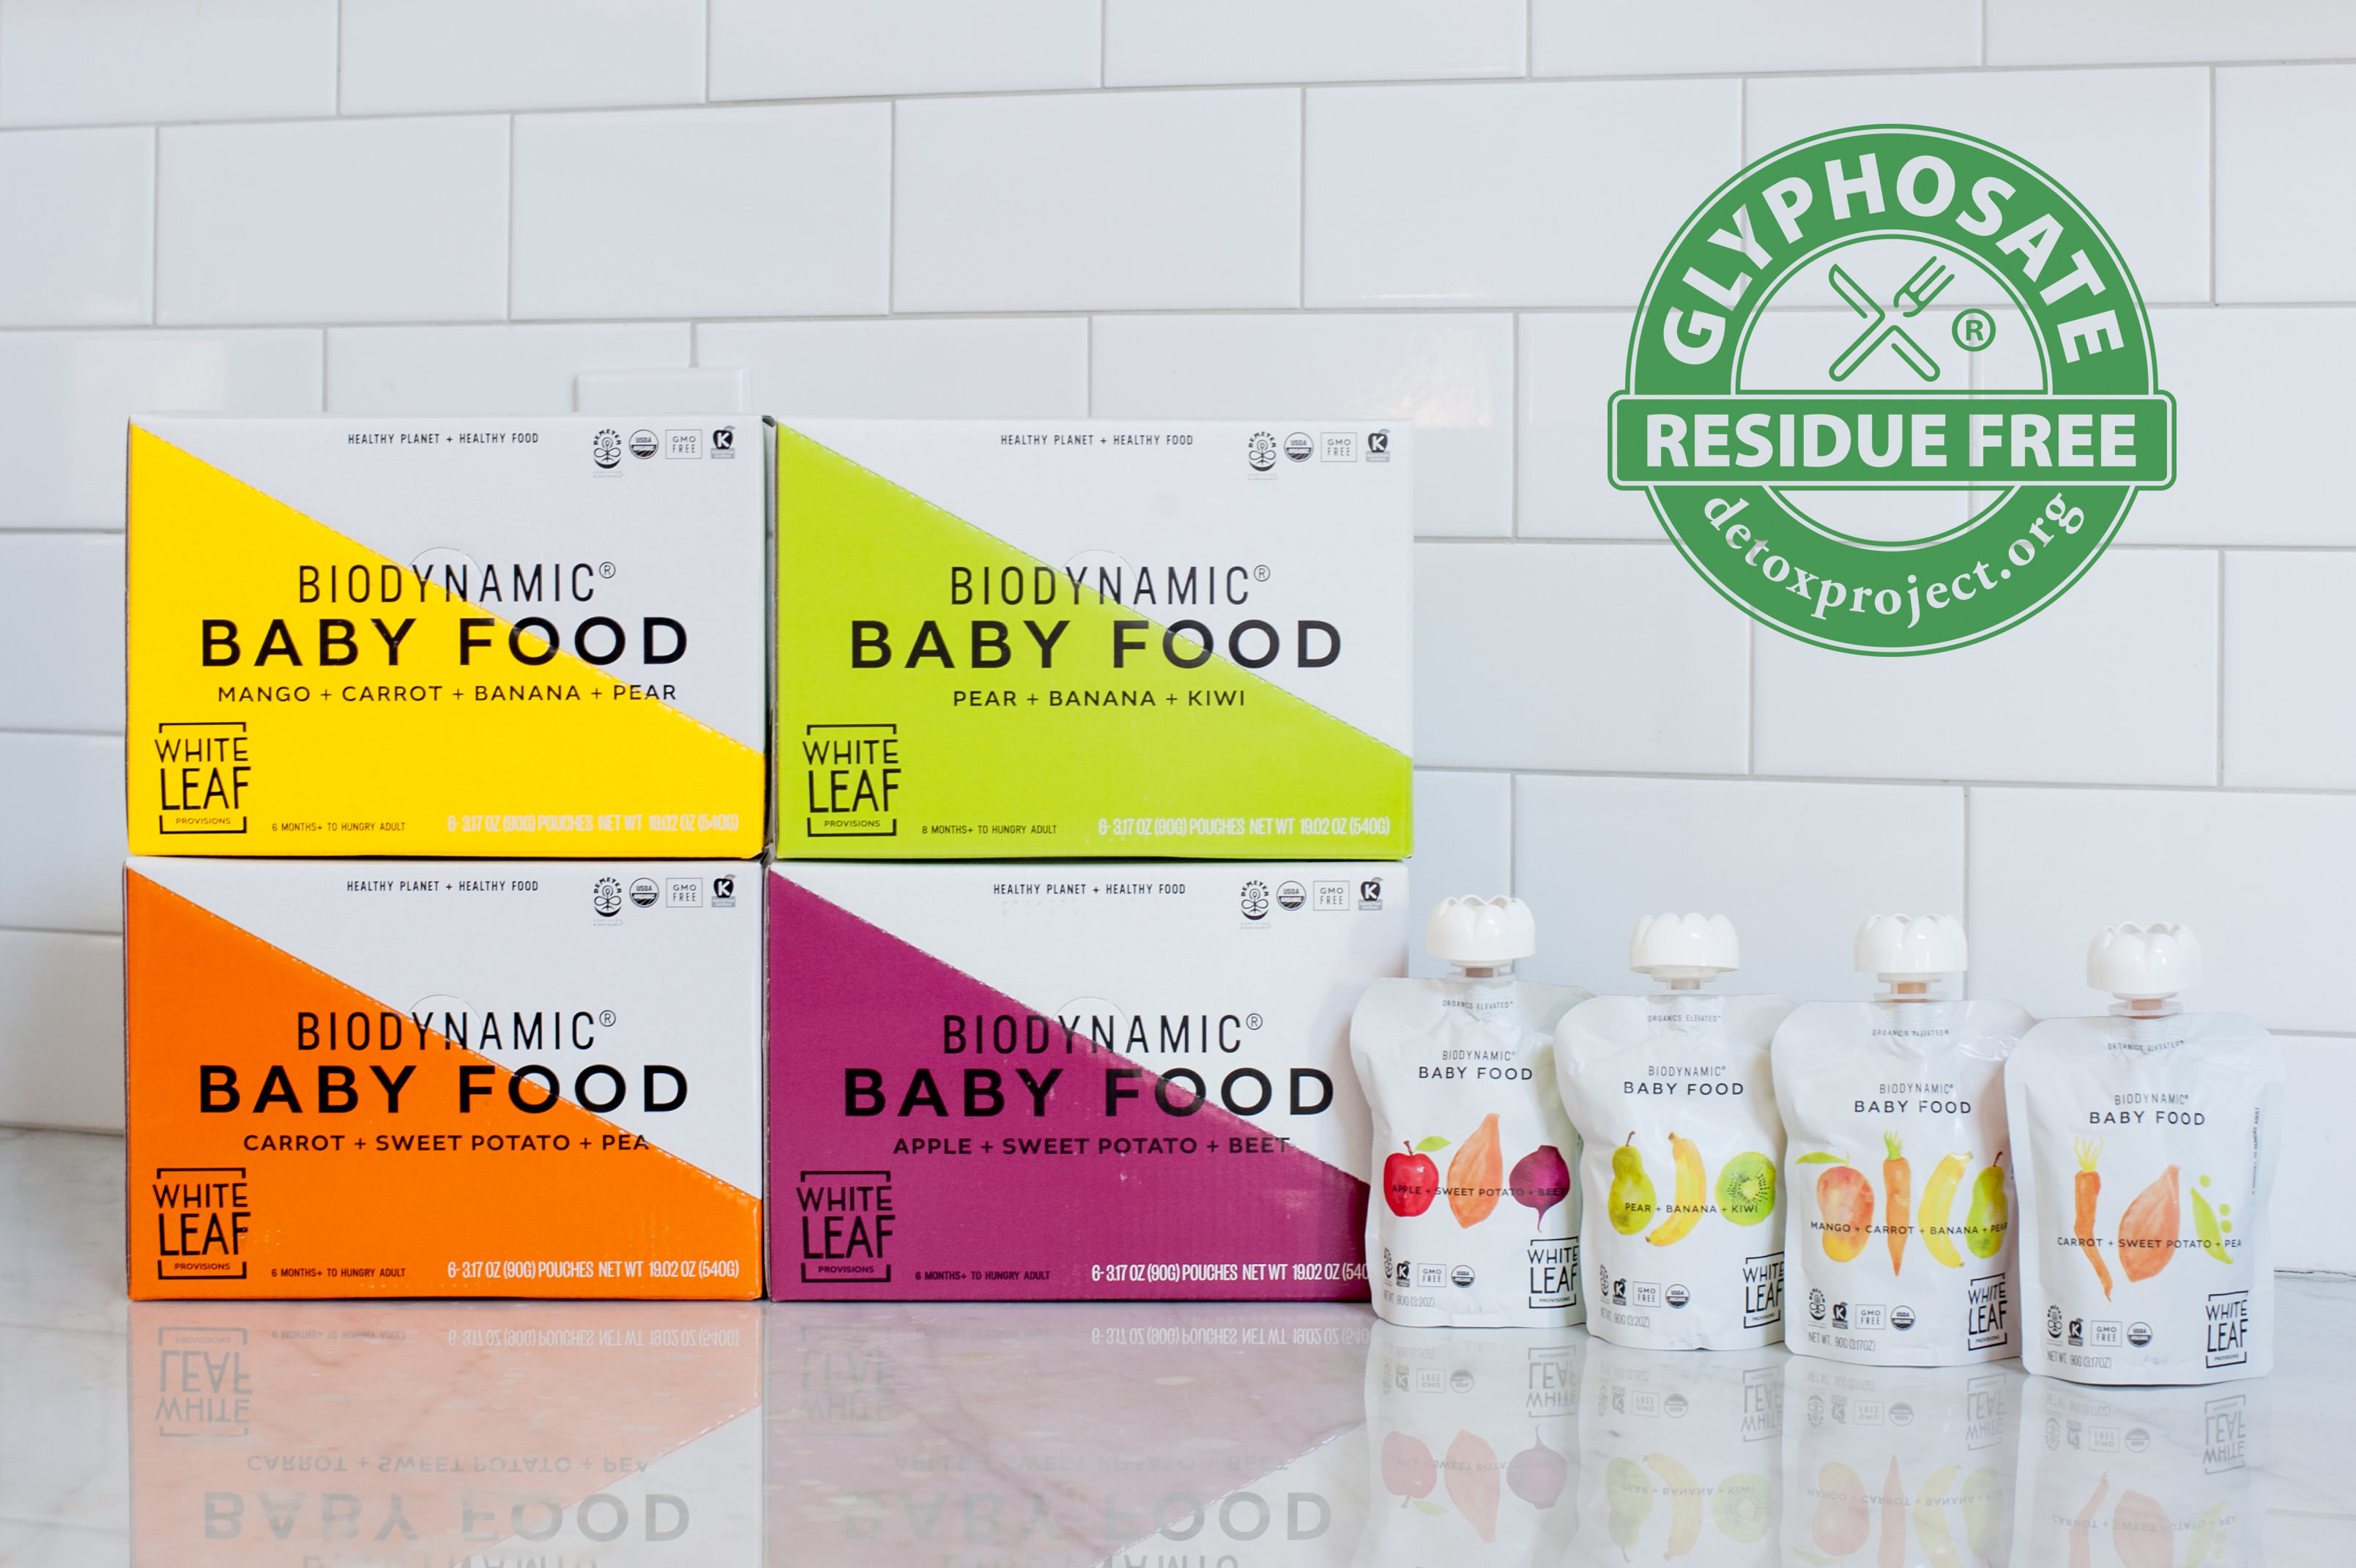 White Leaf Provisions Becomes The First Shelf-Stable Glyphosate Residue Free Certified Baby Food Line